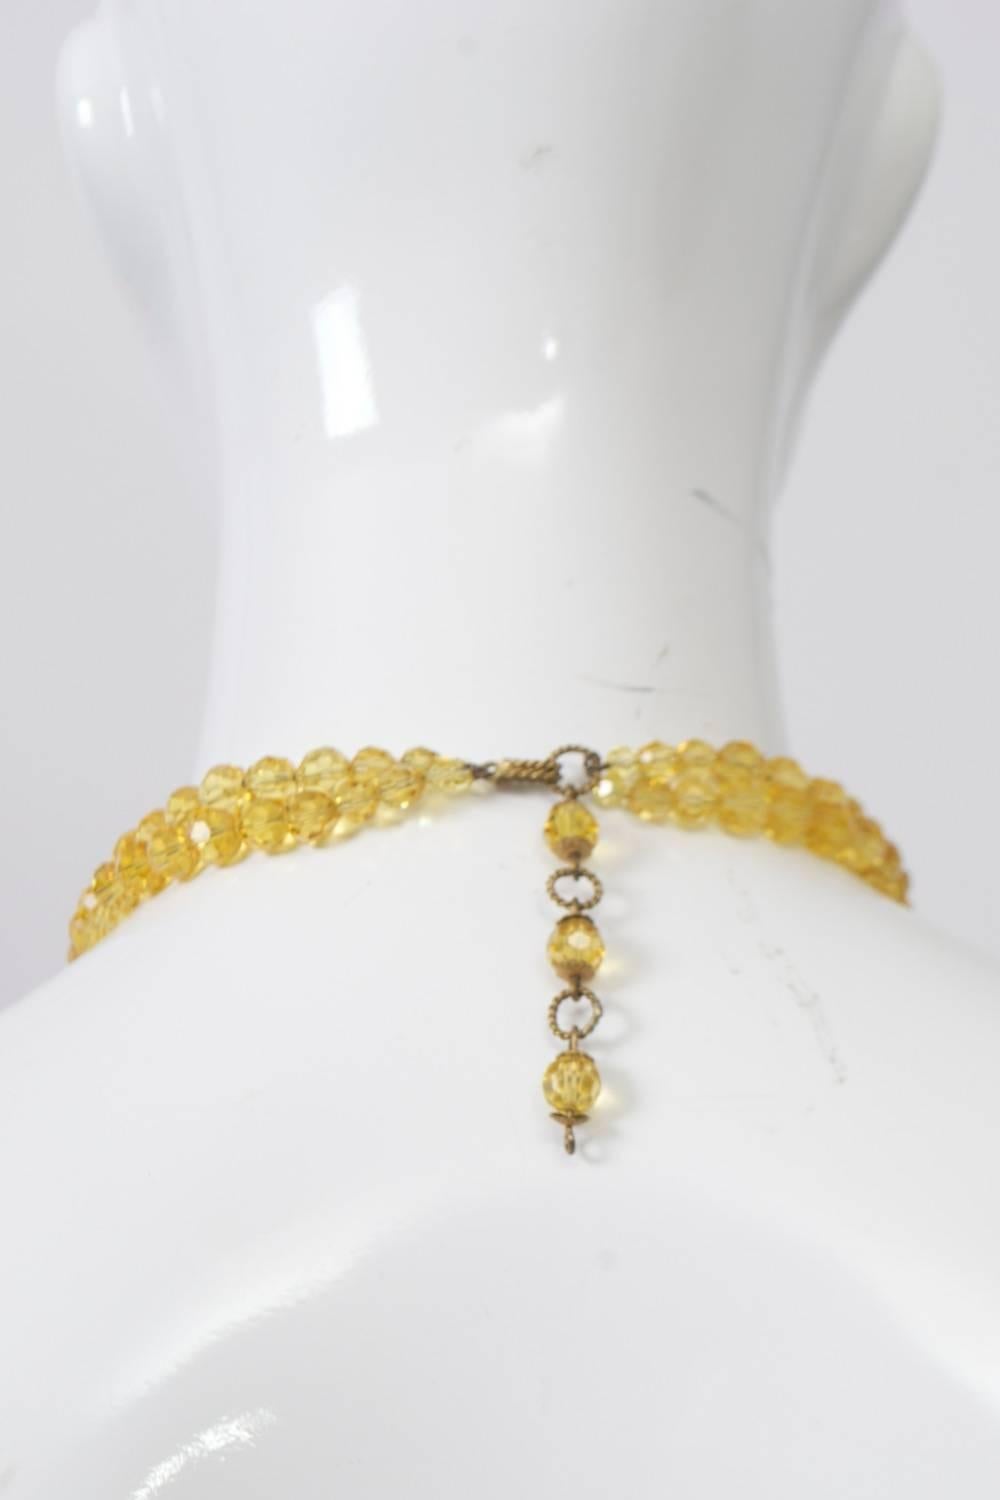 Vibrant crystal beaded choker composed of four strands of faceted round yellow crystals in front and two strands in back, separated by quarter-round spacers covered in two rows of the crystals. Adjustable link and stone closure in back. Marked 